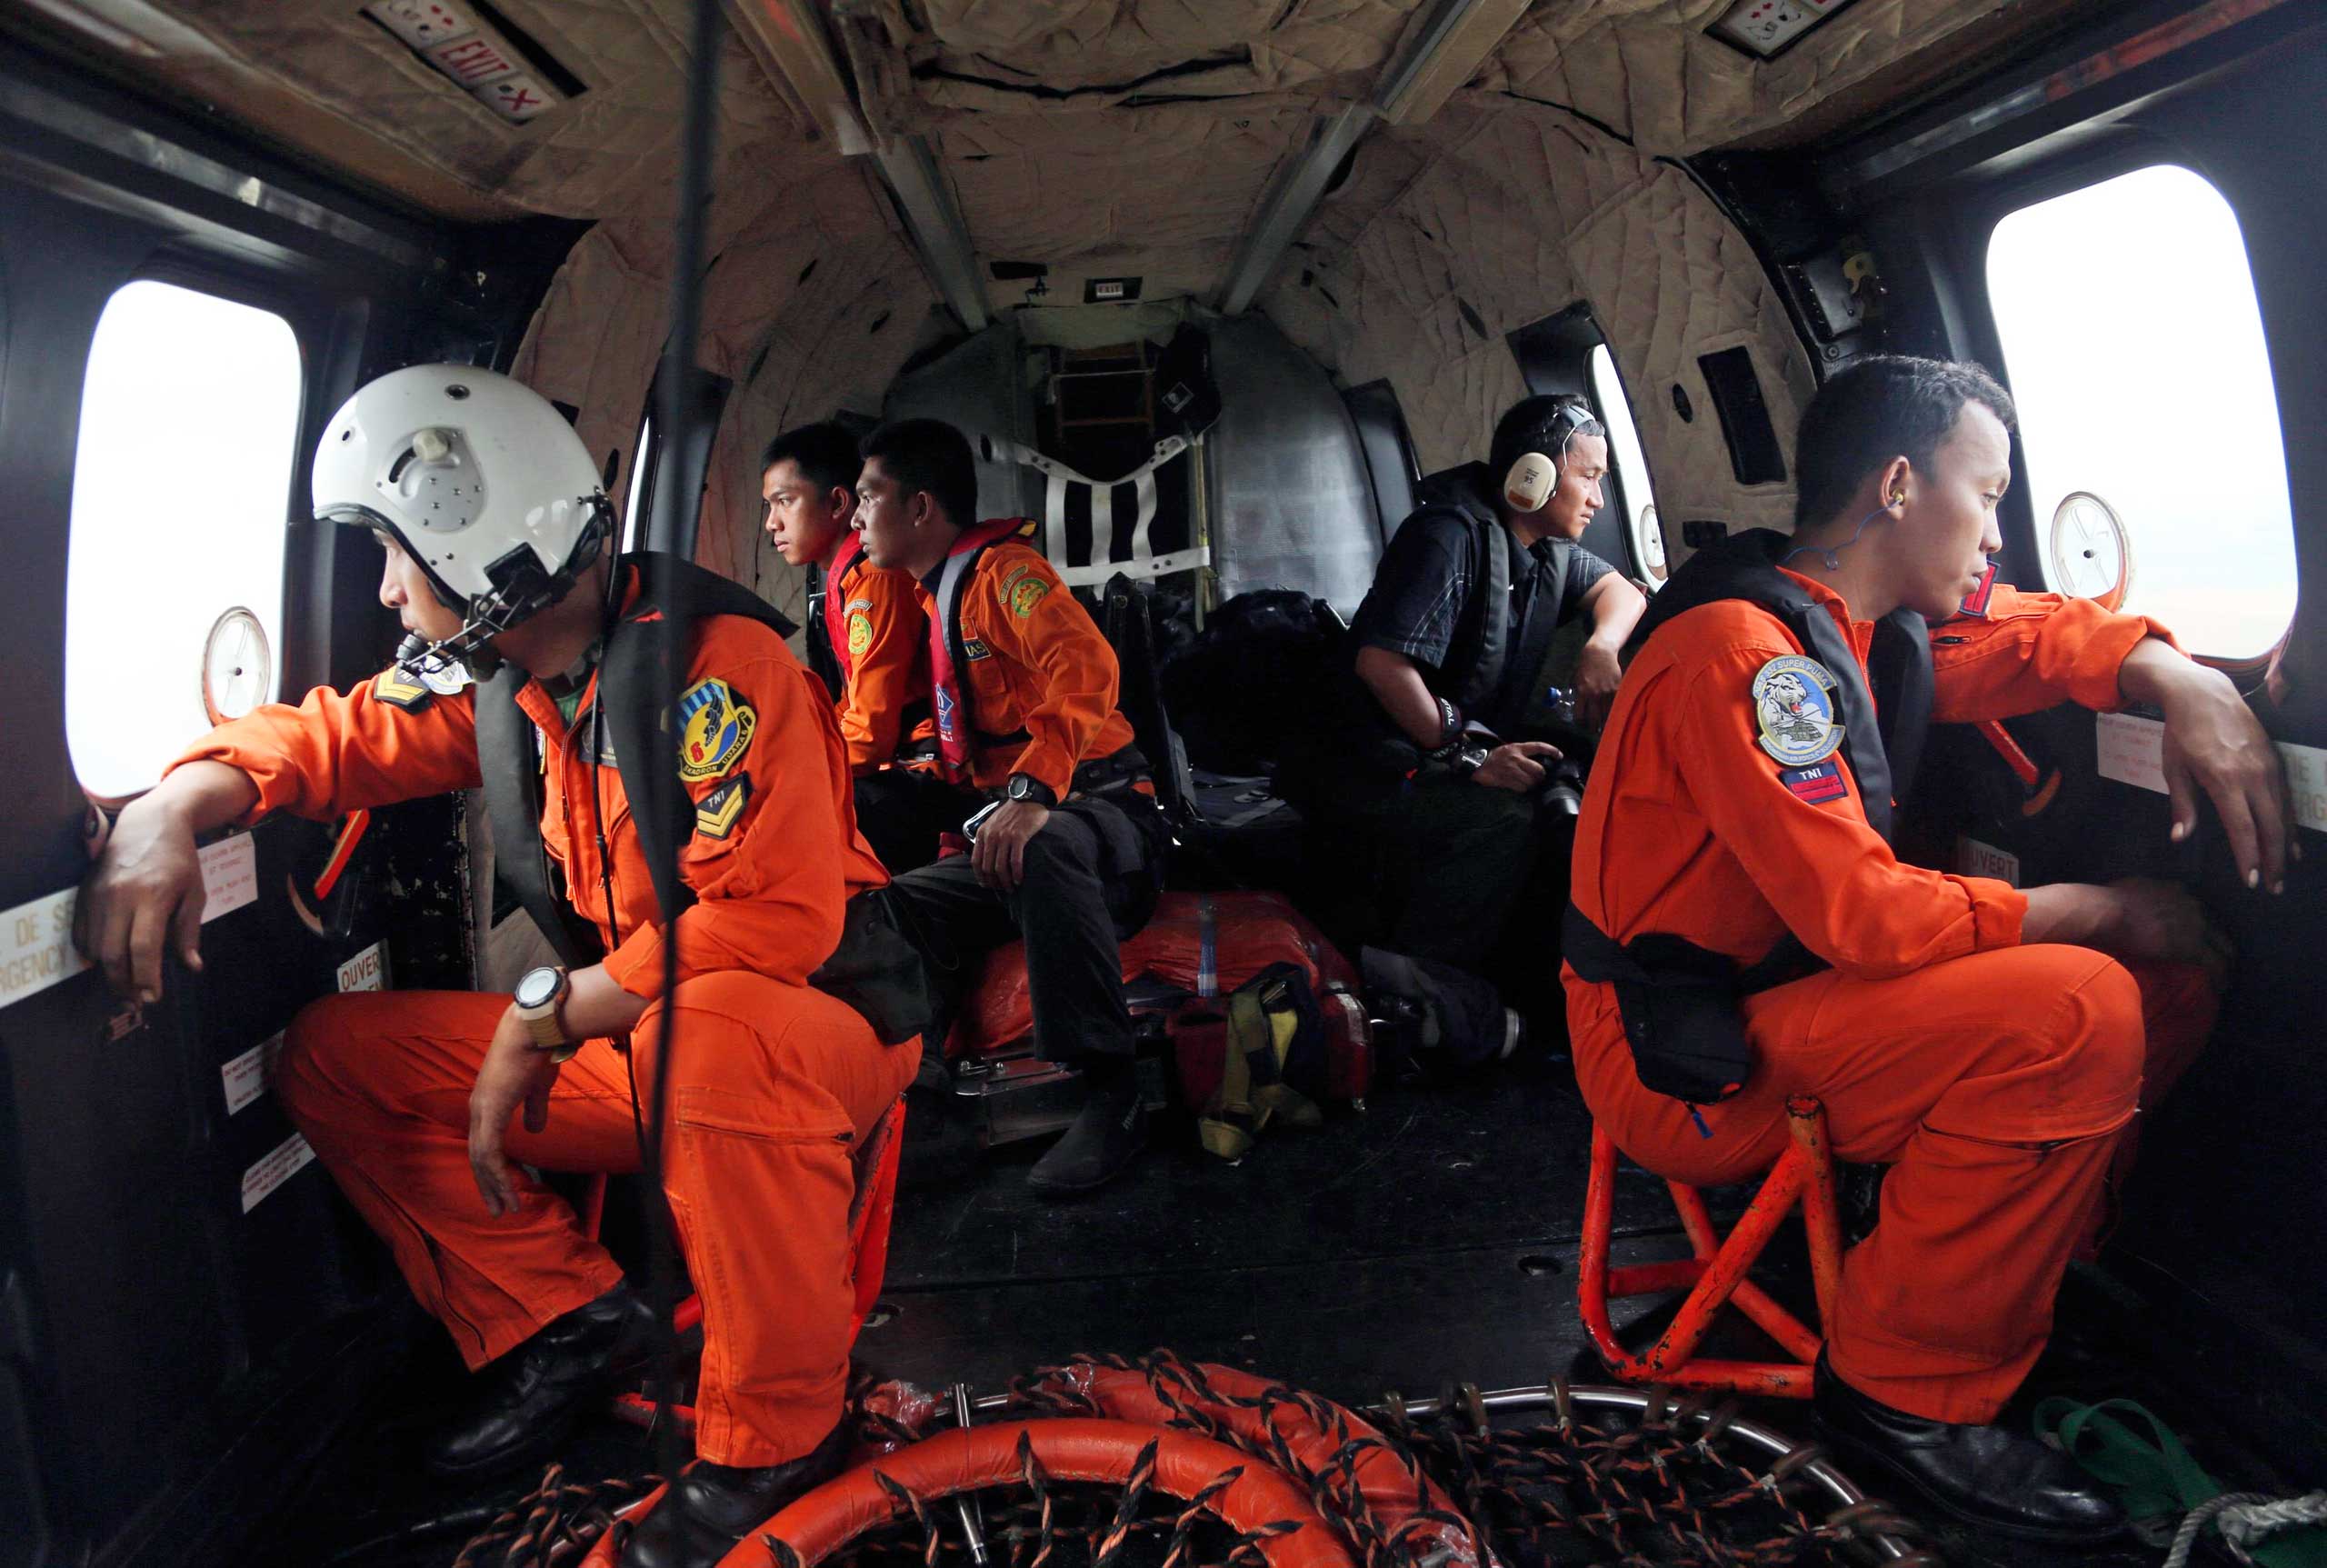 Crewmembers of an Indonesian Air Force NAS 332 Super Puma helicopter look out of the windows during a search operation for the victims and wreckage of AirAsia flight QZ 8501 over the Java Sea